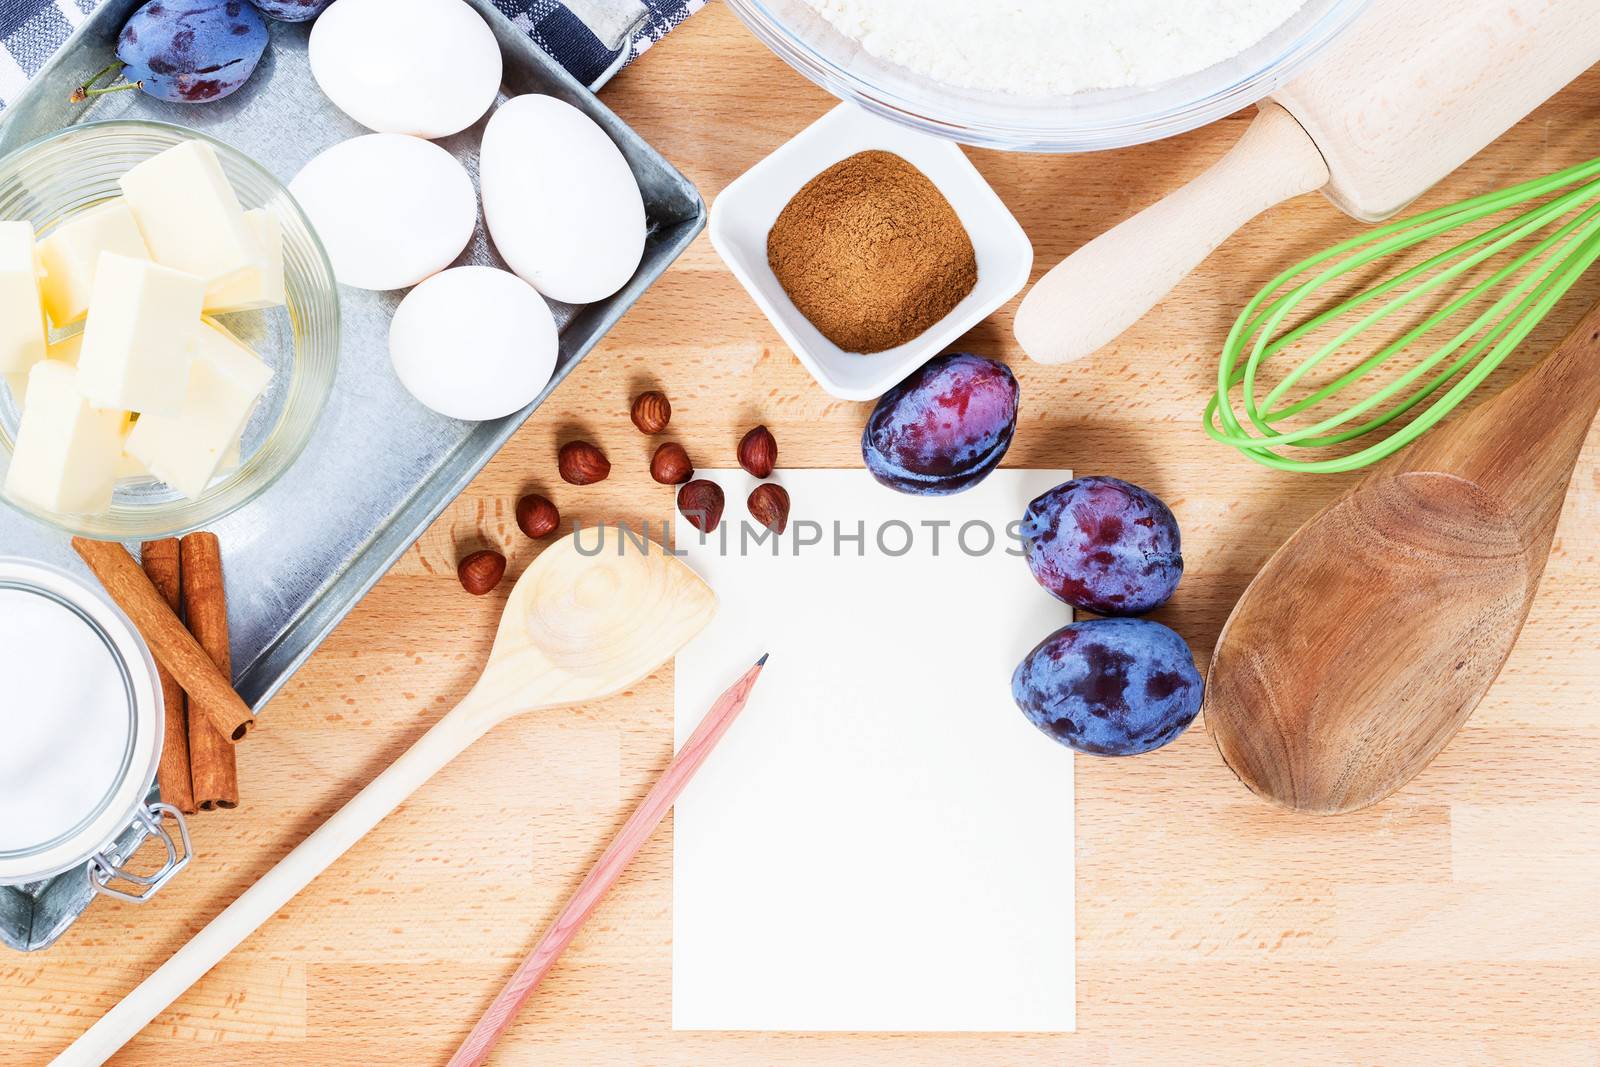 writing a recipe for plum cake with baking ingredients and tools from top with paper and a pencil